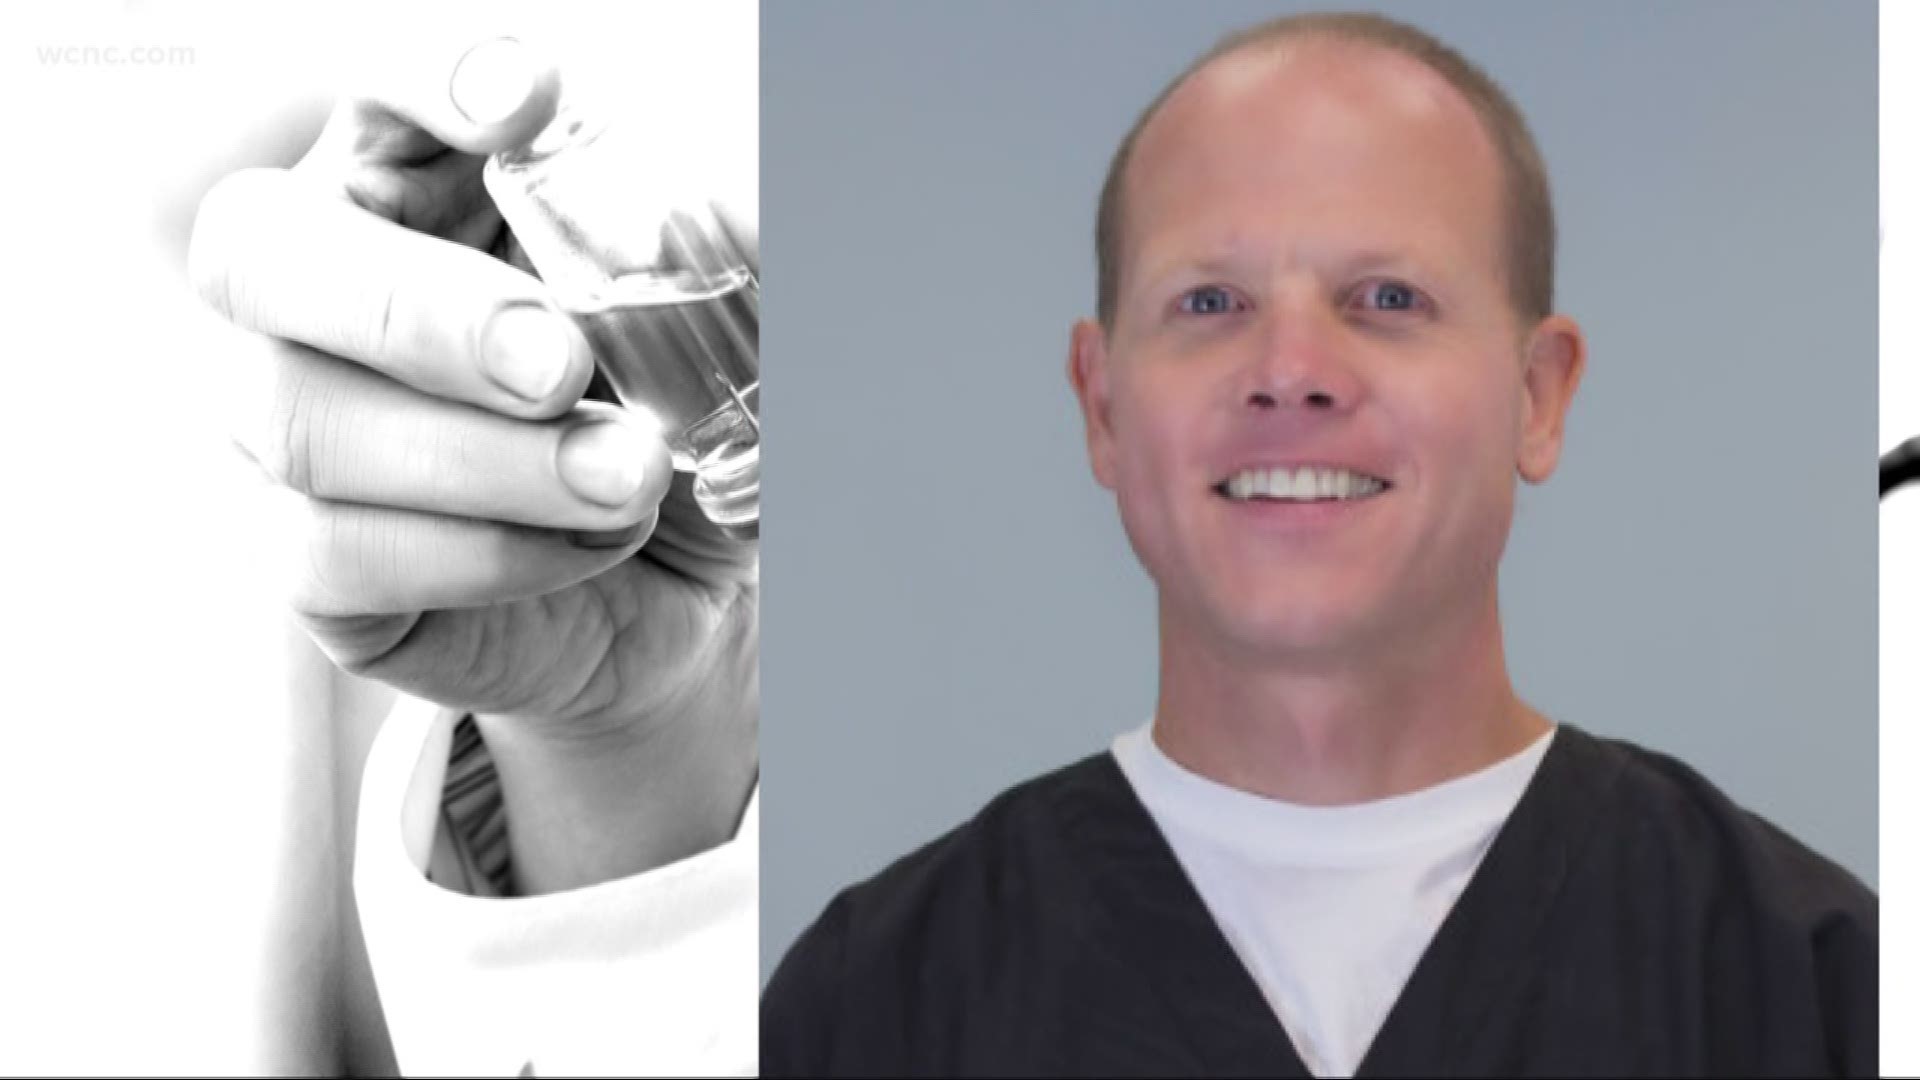 Huntersville cosmetic surgeon sanctioned by NC medical